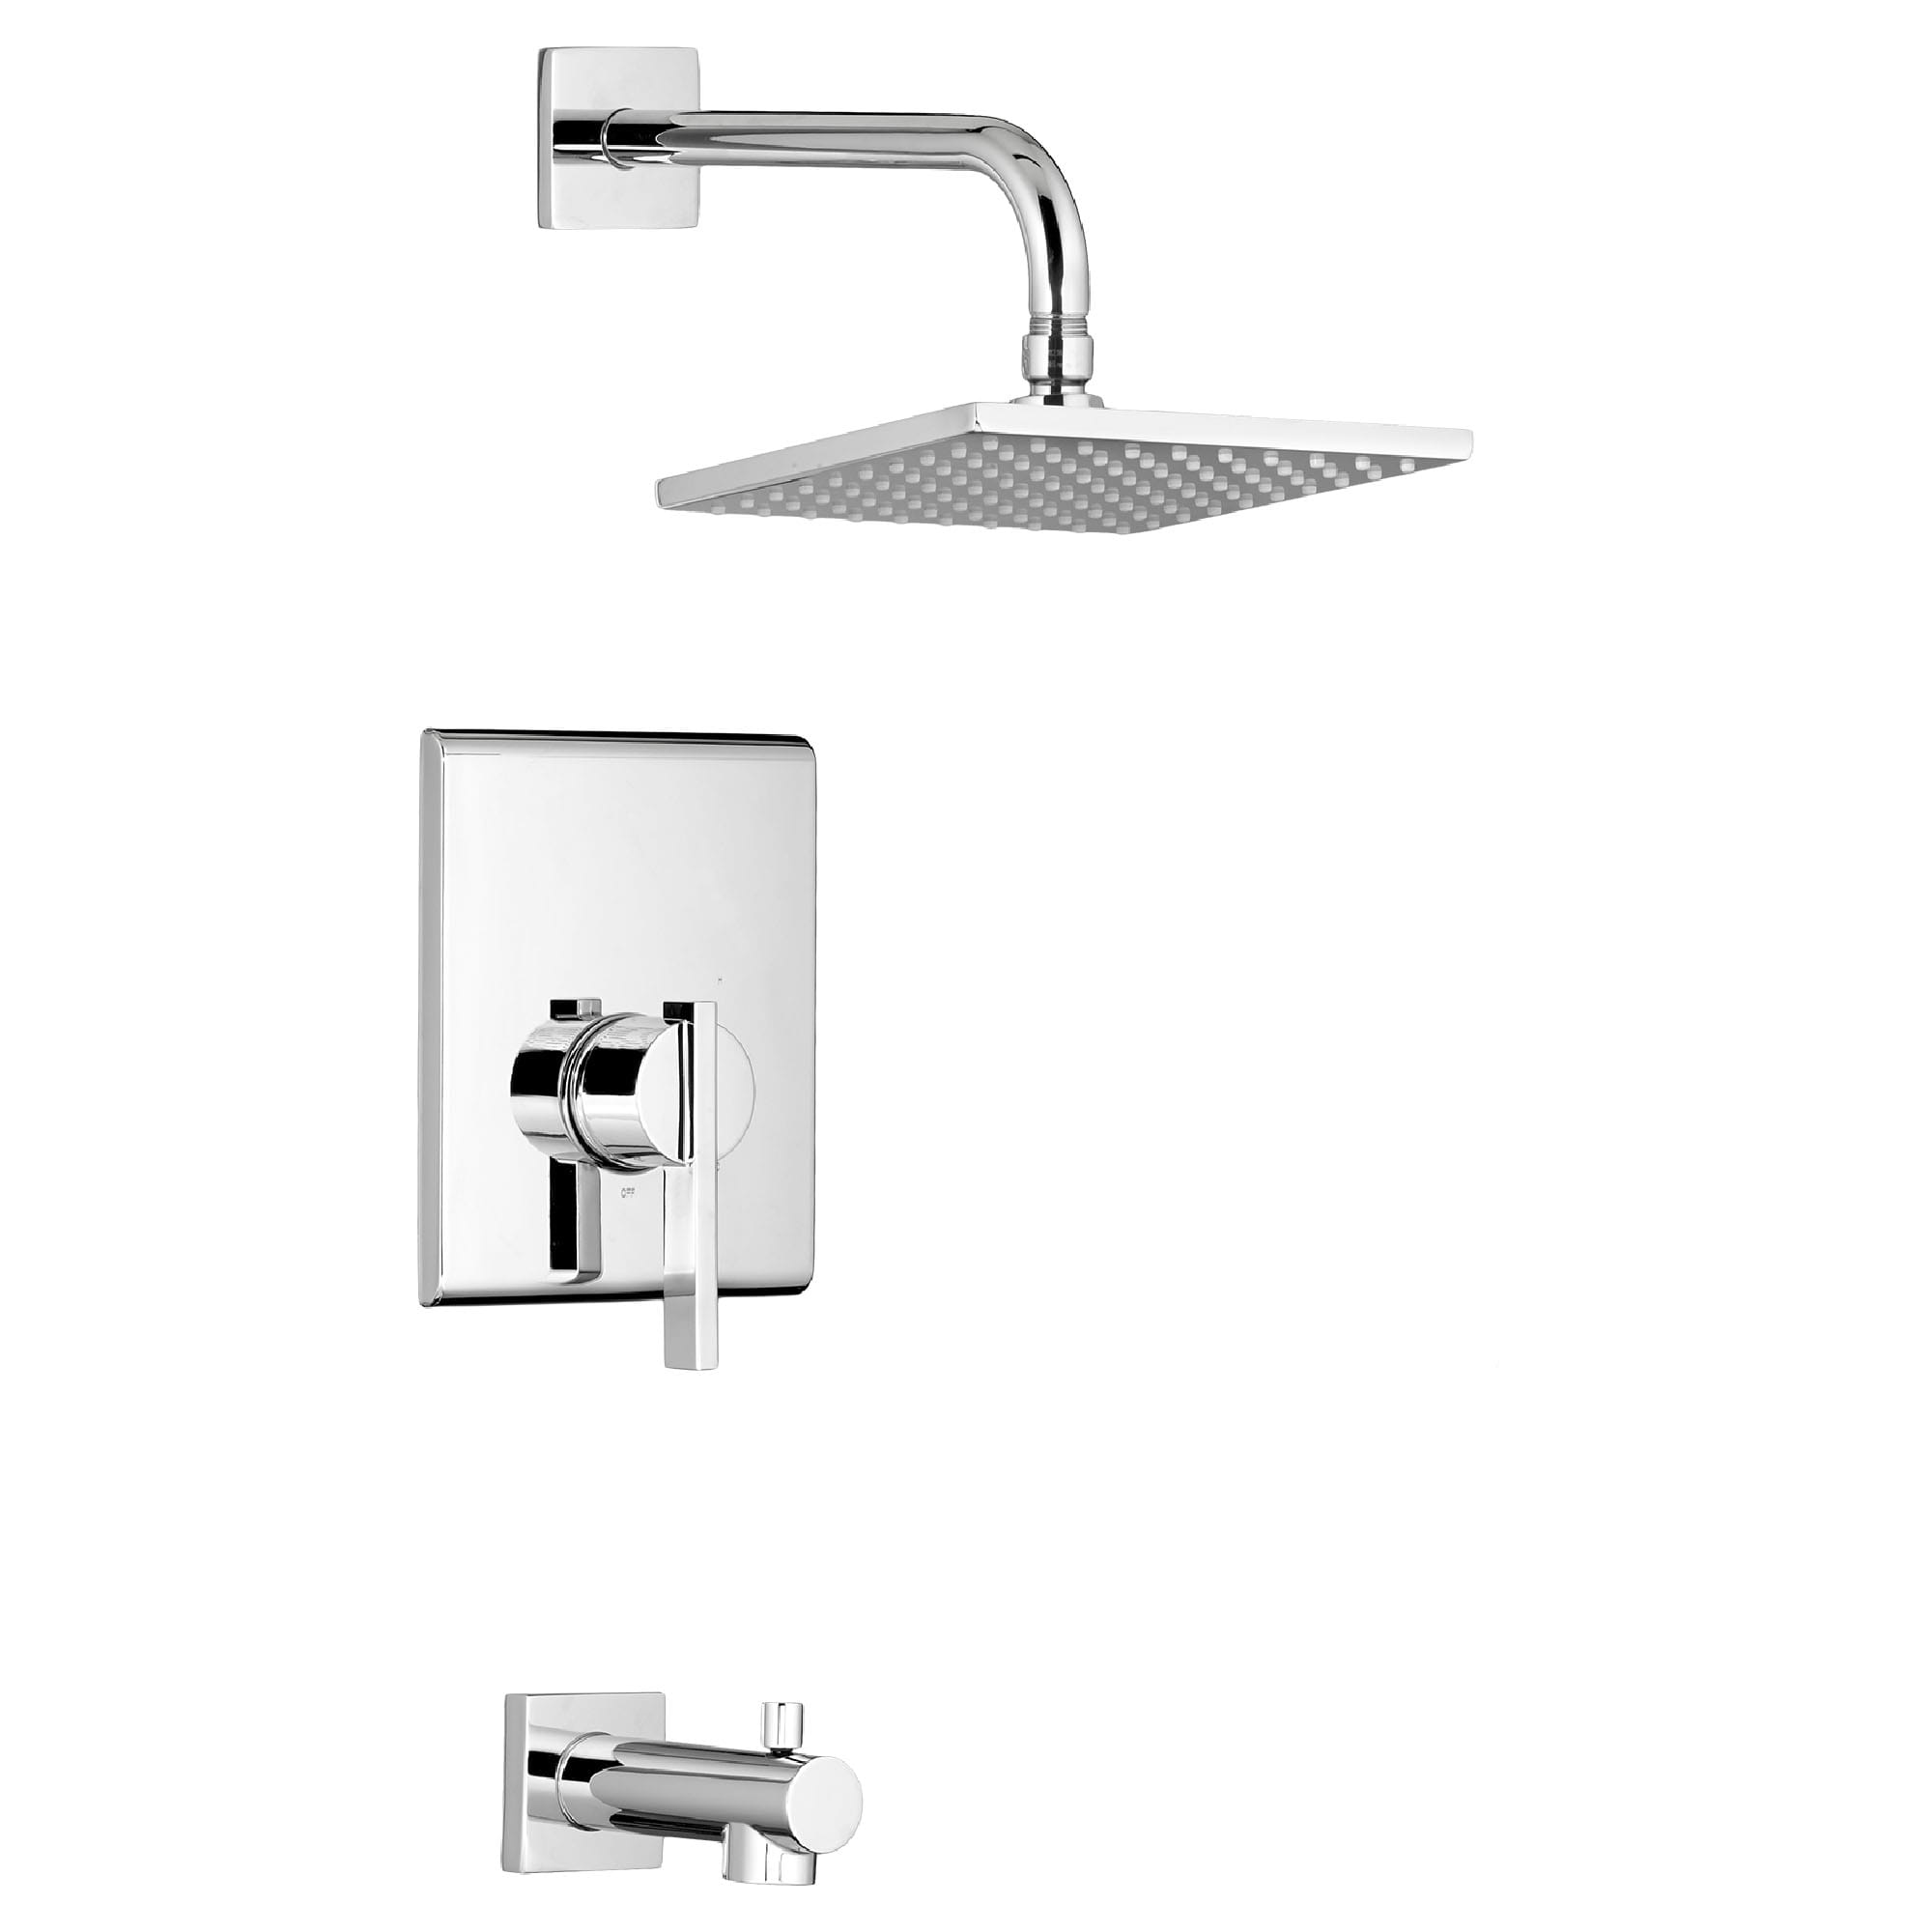 Times Square 25 gpm 95 L min Tub and Shower Trim Kit With Rain Showerhead Double Ceramic Pressure Balance Cartridge With Lever Handle CHROME